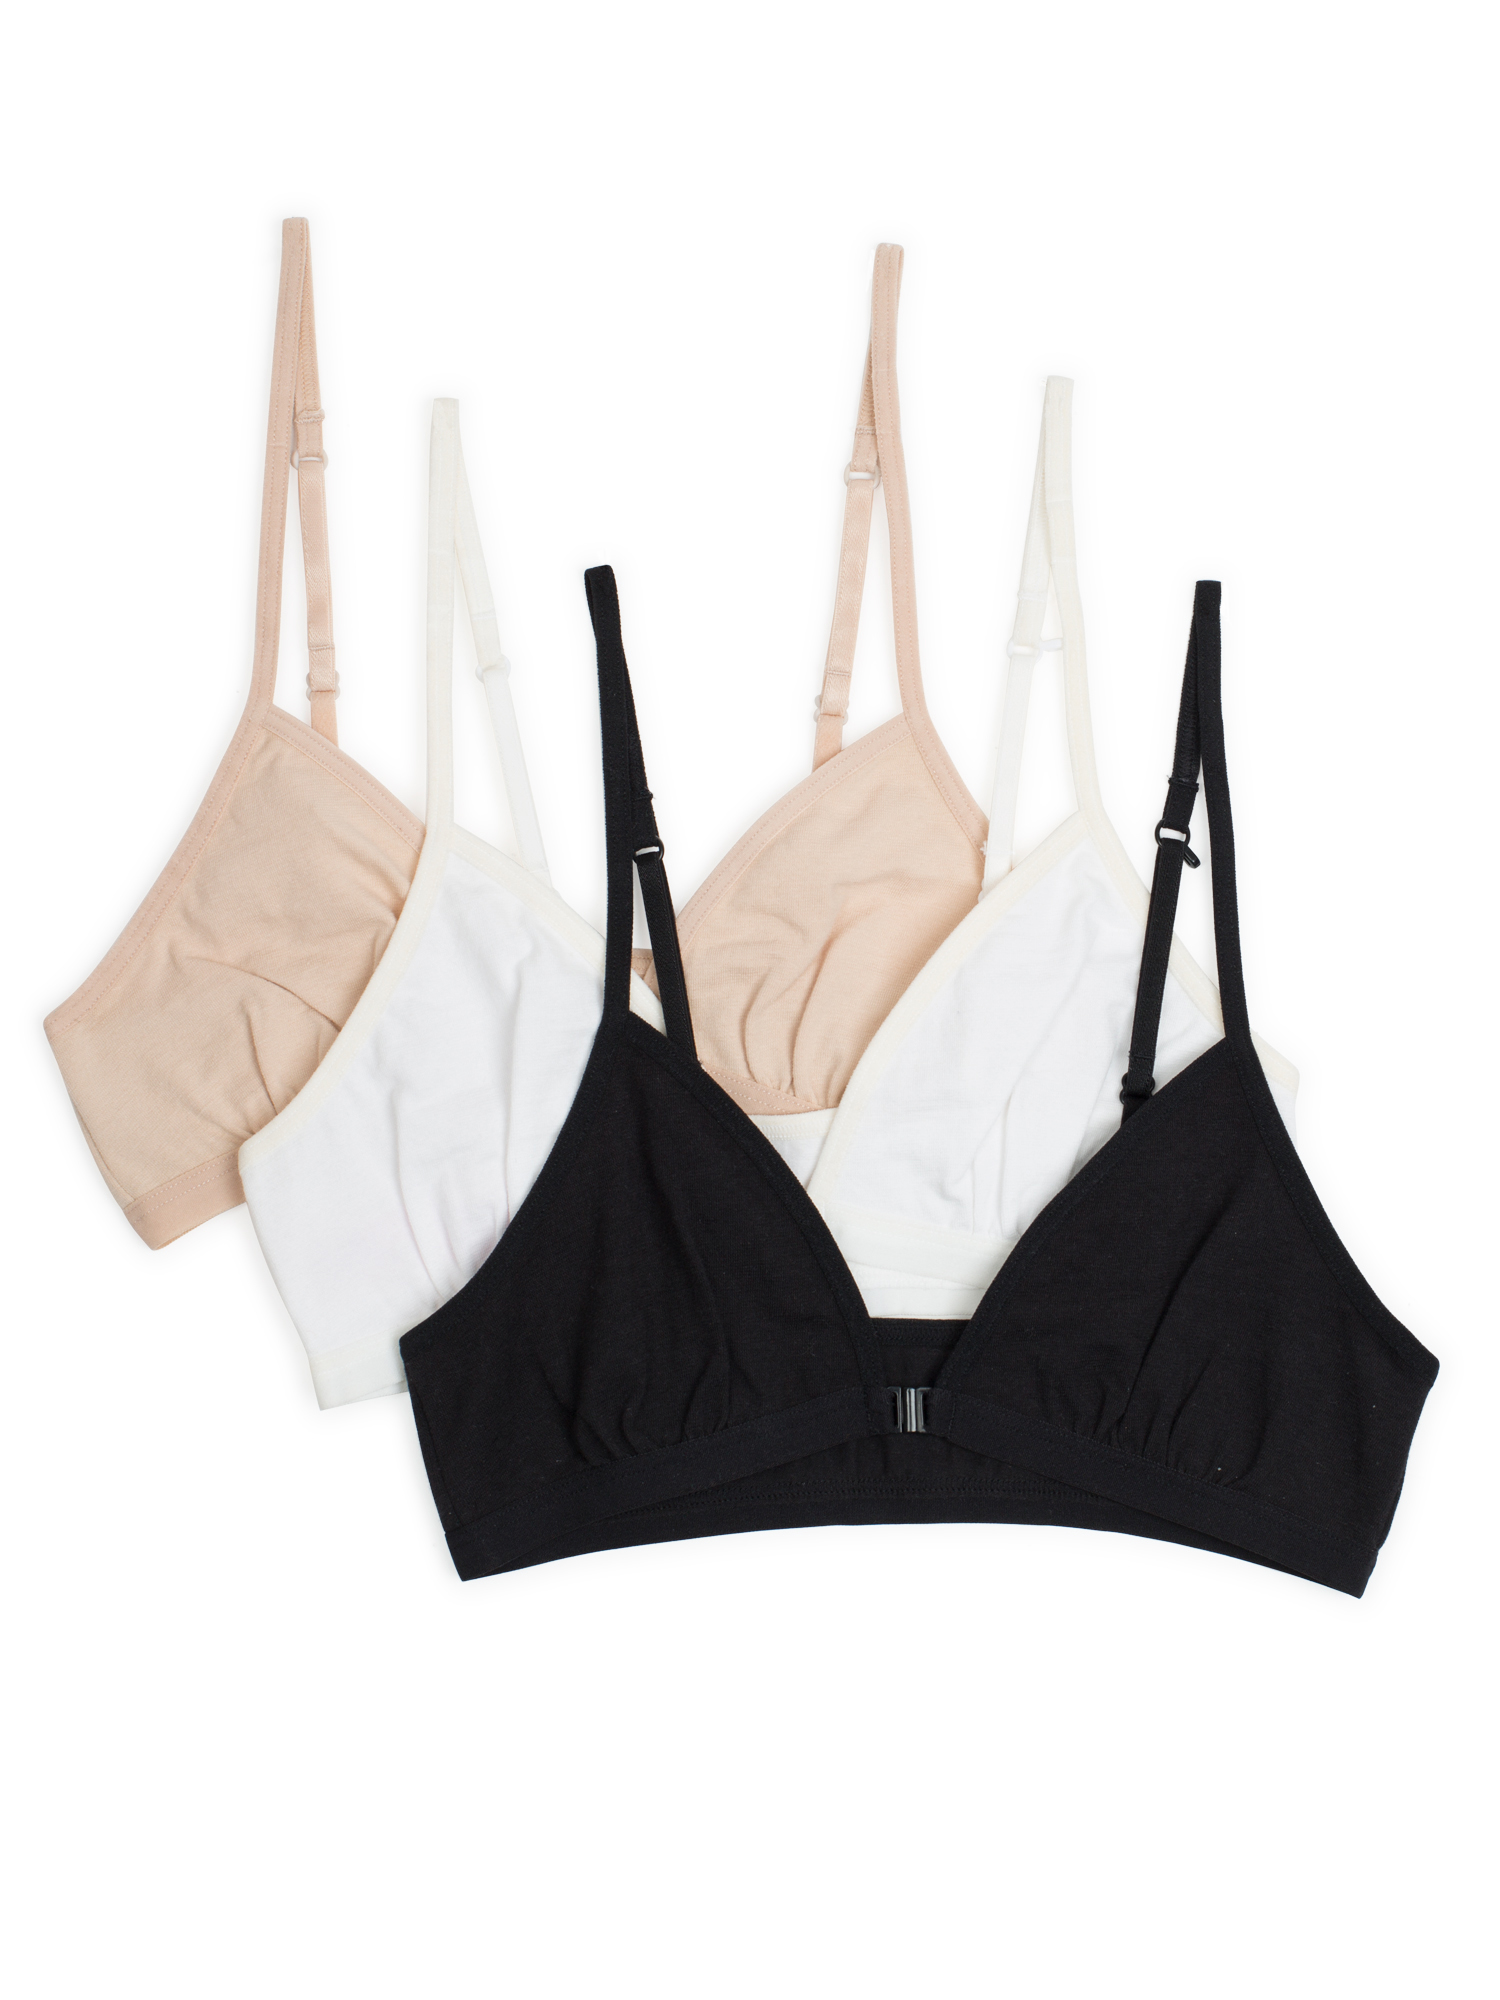 Fruit of the Loom Girls Convertible Bralette 3-Pack, Sizes 28-38 - image 1 of 2